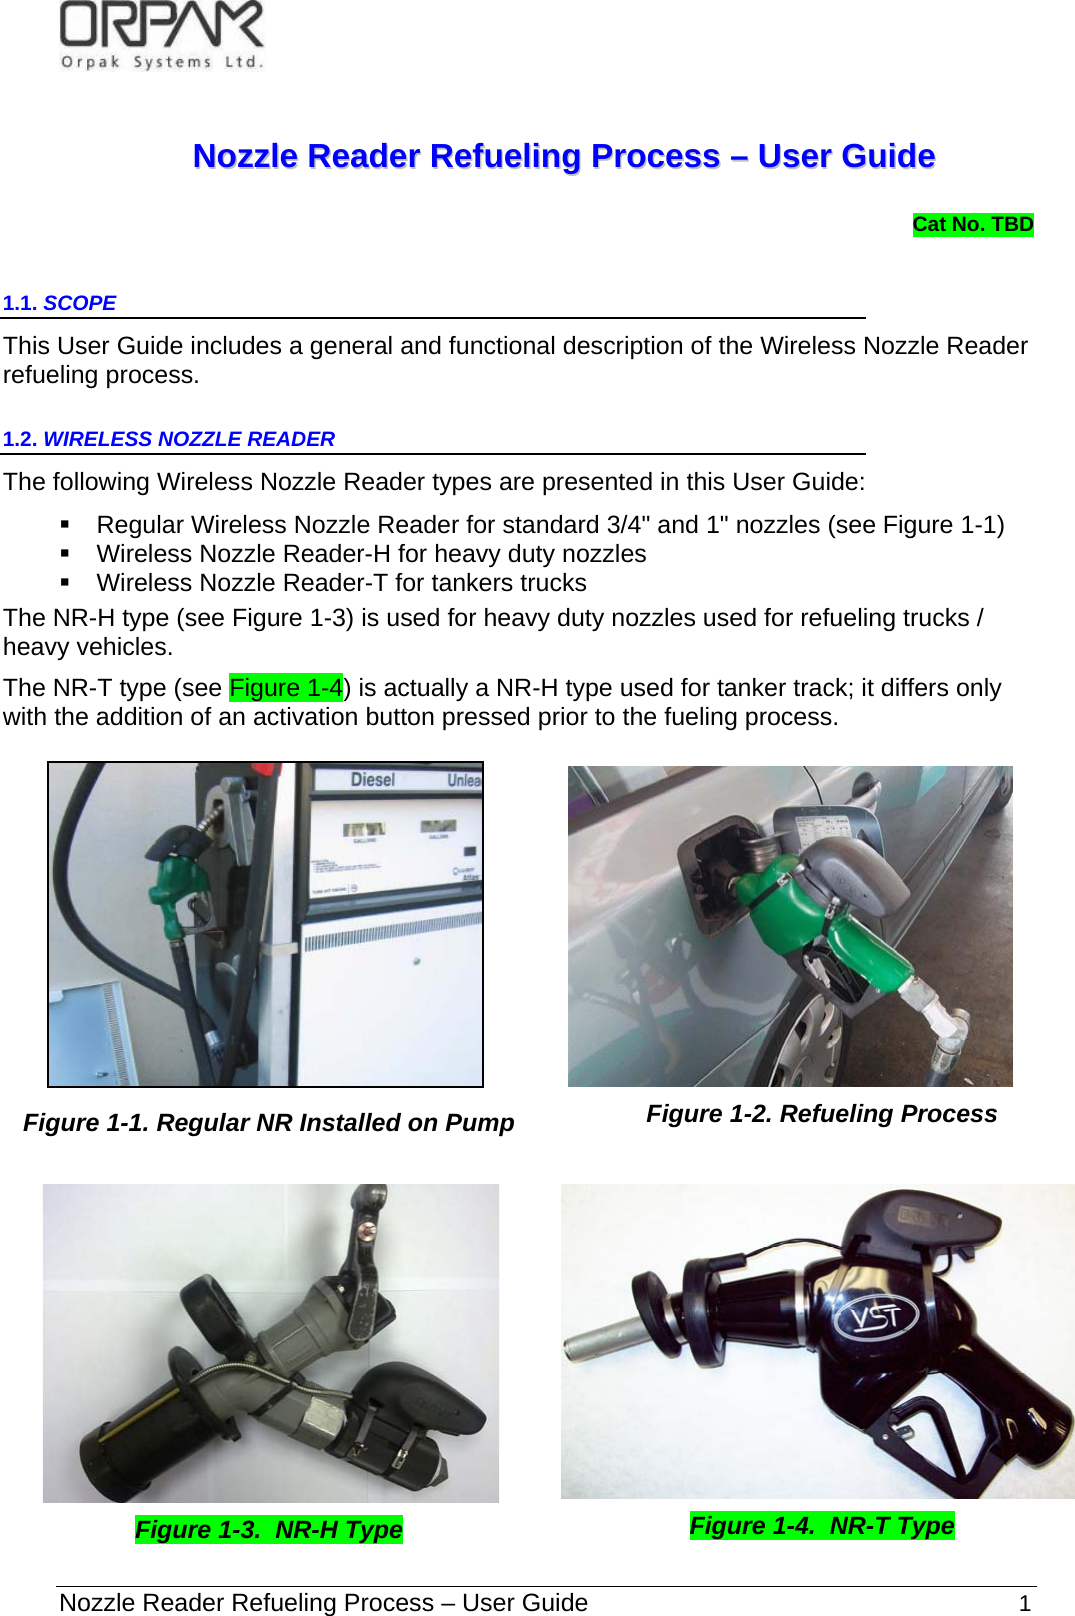   Nozzle Reader Refueling Process – User Guide                                                              1 NNoozzzzllee  RReeaaddeerr  RReeffuueelliinngg  PPrroocceessss  ––  UUsseerr  GGuuiiddee  Cat No. TBD  1.1. SCOPE  This User Guide includes a general and functional description of the Wireless Nozzle Reader refueling process. 1.2. WIRELESS NOZZLE READER    The following Wireless Nozzle Reader types are presented in this User Guide:     Regular Wireless Nozzle Reader for standard 3/4&quot; and 1&quot; nozzles (see Figure  1-1)    Wireless Nozzle Reader-H for heavy duty nozzles   Wireless Nozzle Reader-T for tankers trucks The NR-H type (see Figure 1-3) is used for heavy duty nozzles used for refueling trucks / heavy vehicles. The NR-T type (see Figure 1-4) is actually a NR-H type used for tanker track; it differs only with the addition of an activation button pressed prior to the fueling process.      Figure  1-1. Regular NR Installed on Pump   Figure  1-2. Refueling Process     Figure 1-4.  NR-T Type Figure 1-3.  NR-H Type  